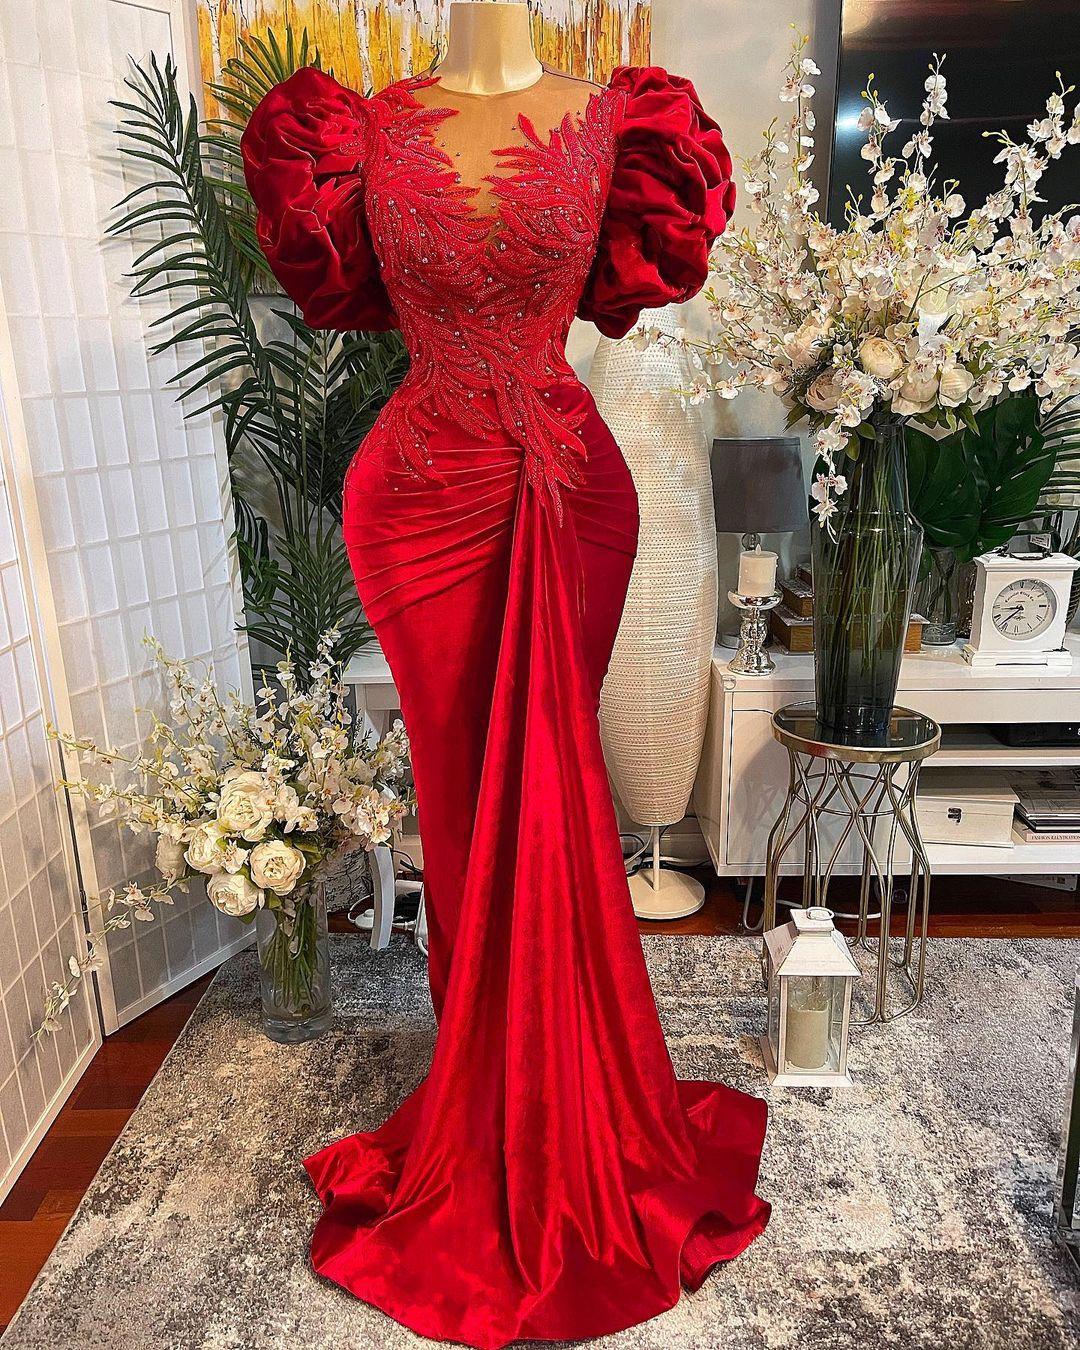 Red Prom Dresses, Lace Prom Dresses, Long Sleeve Prom Dresses, Mermaid Prom Dresses, Beaded Prom Dresses, Crystal Prom Dresses, Evening Gowns,